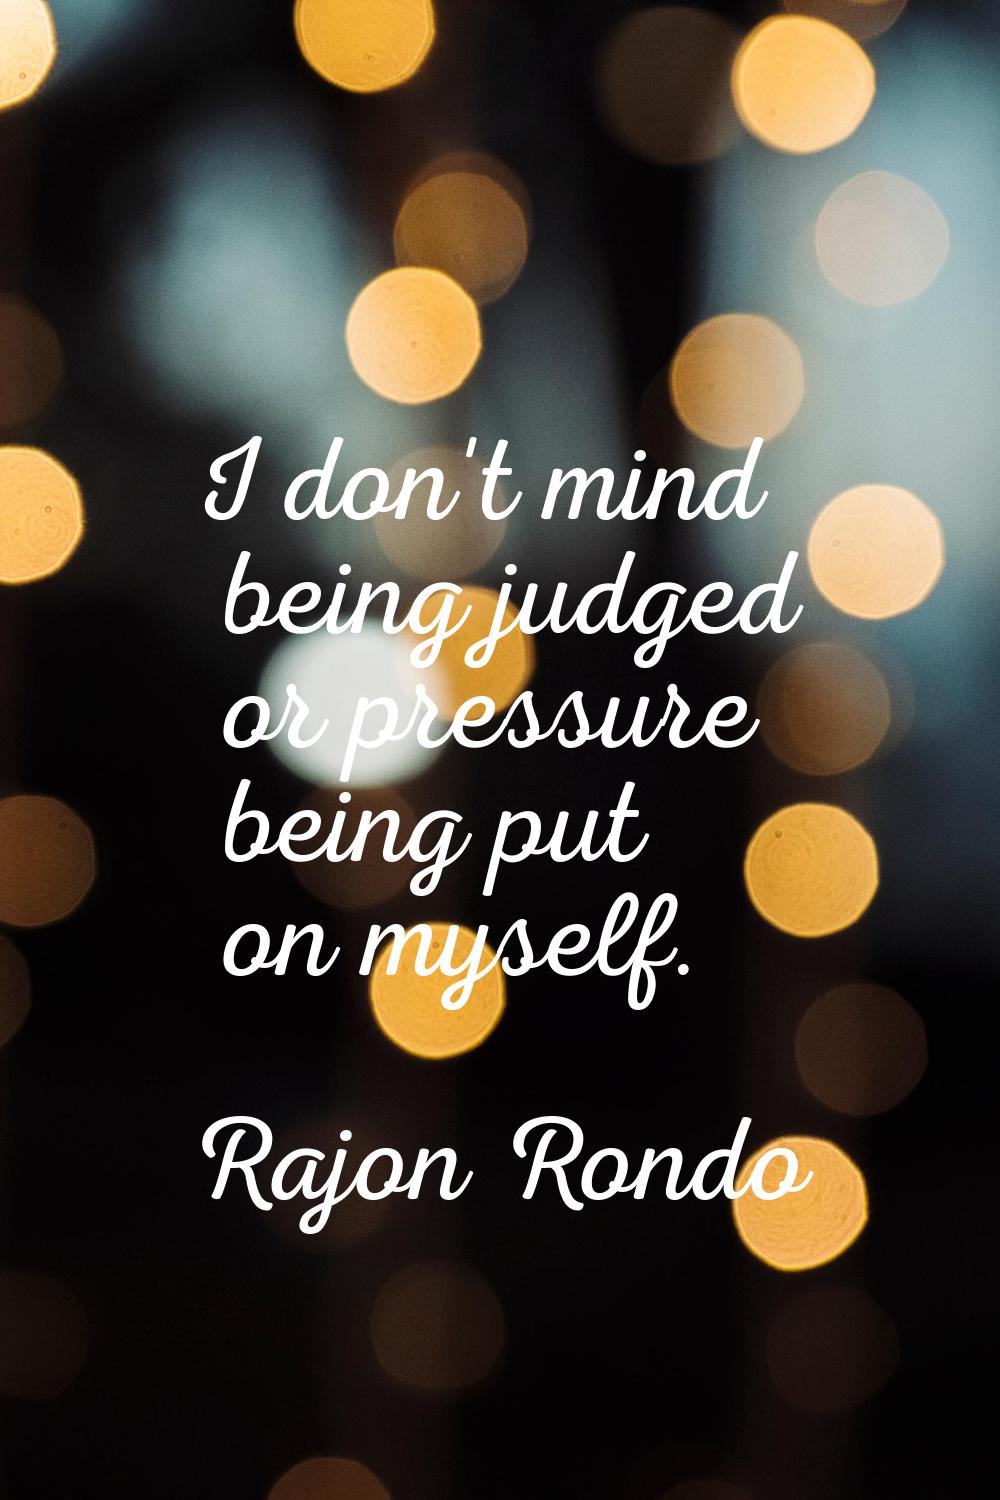 I don't mind being judged or pressure being put on myself.